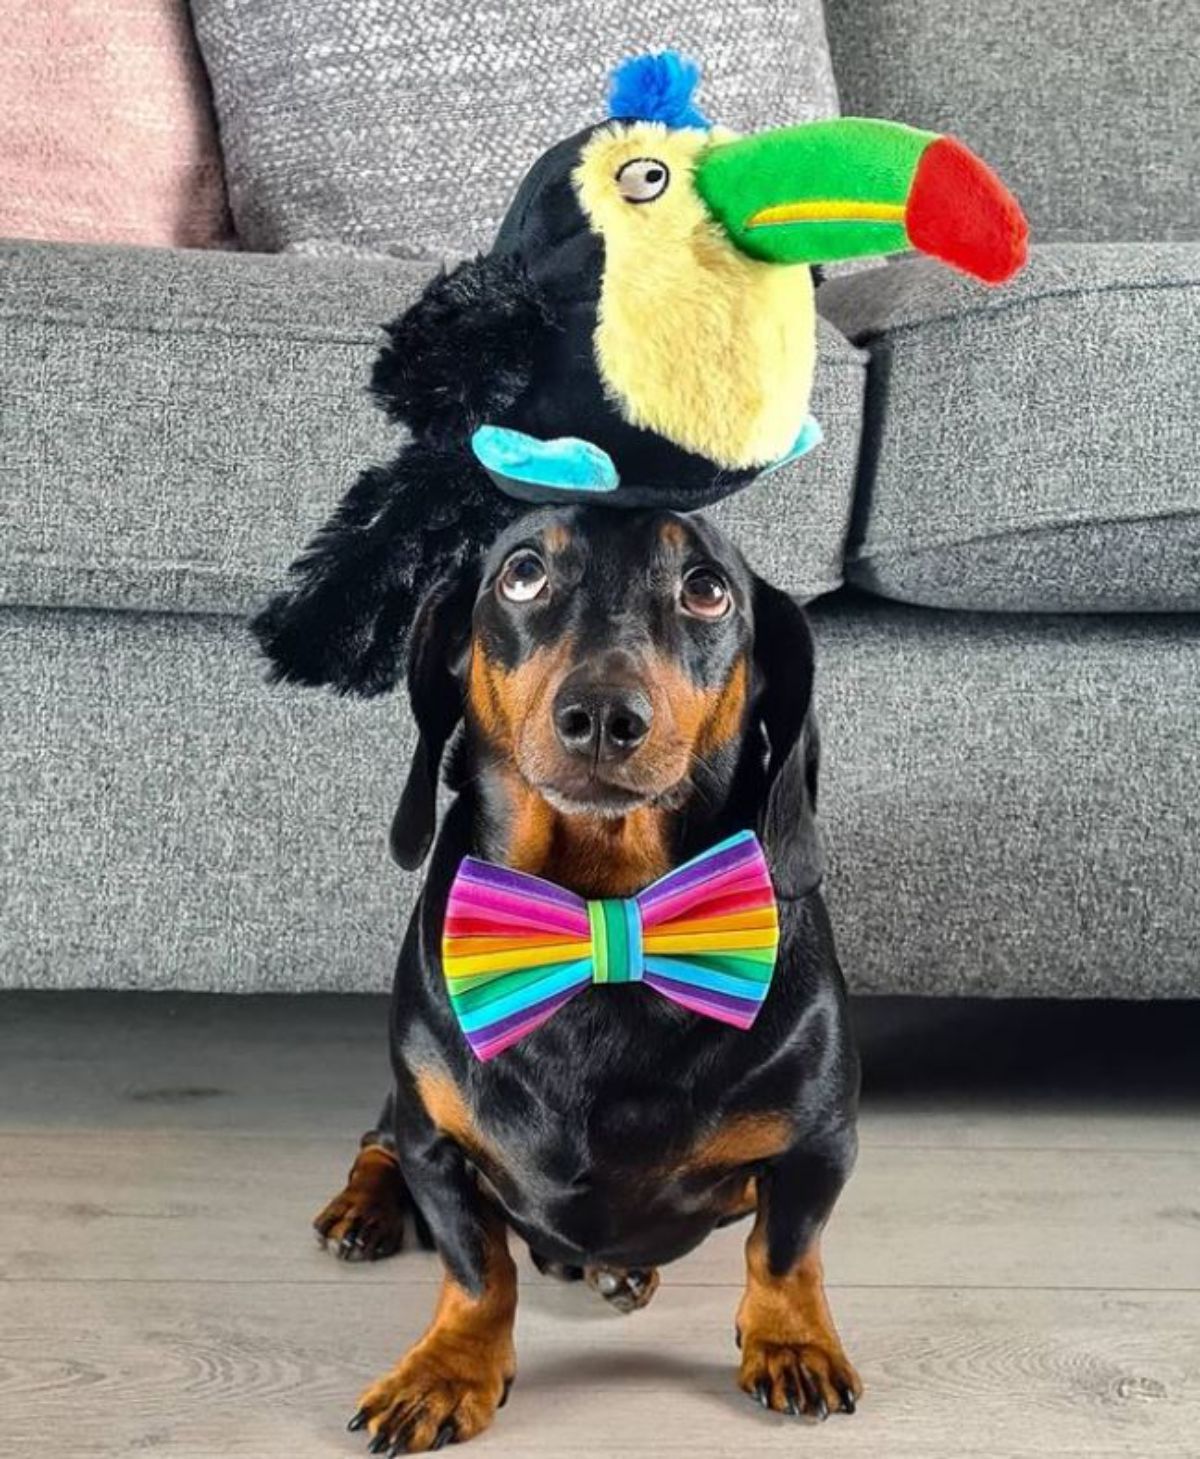 black and brown dachshund standing with a large stuffed toucan toy and the dog is wearing a multicoloured bowtie